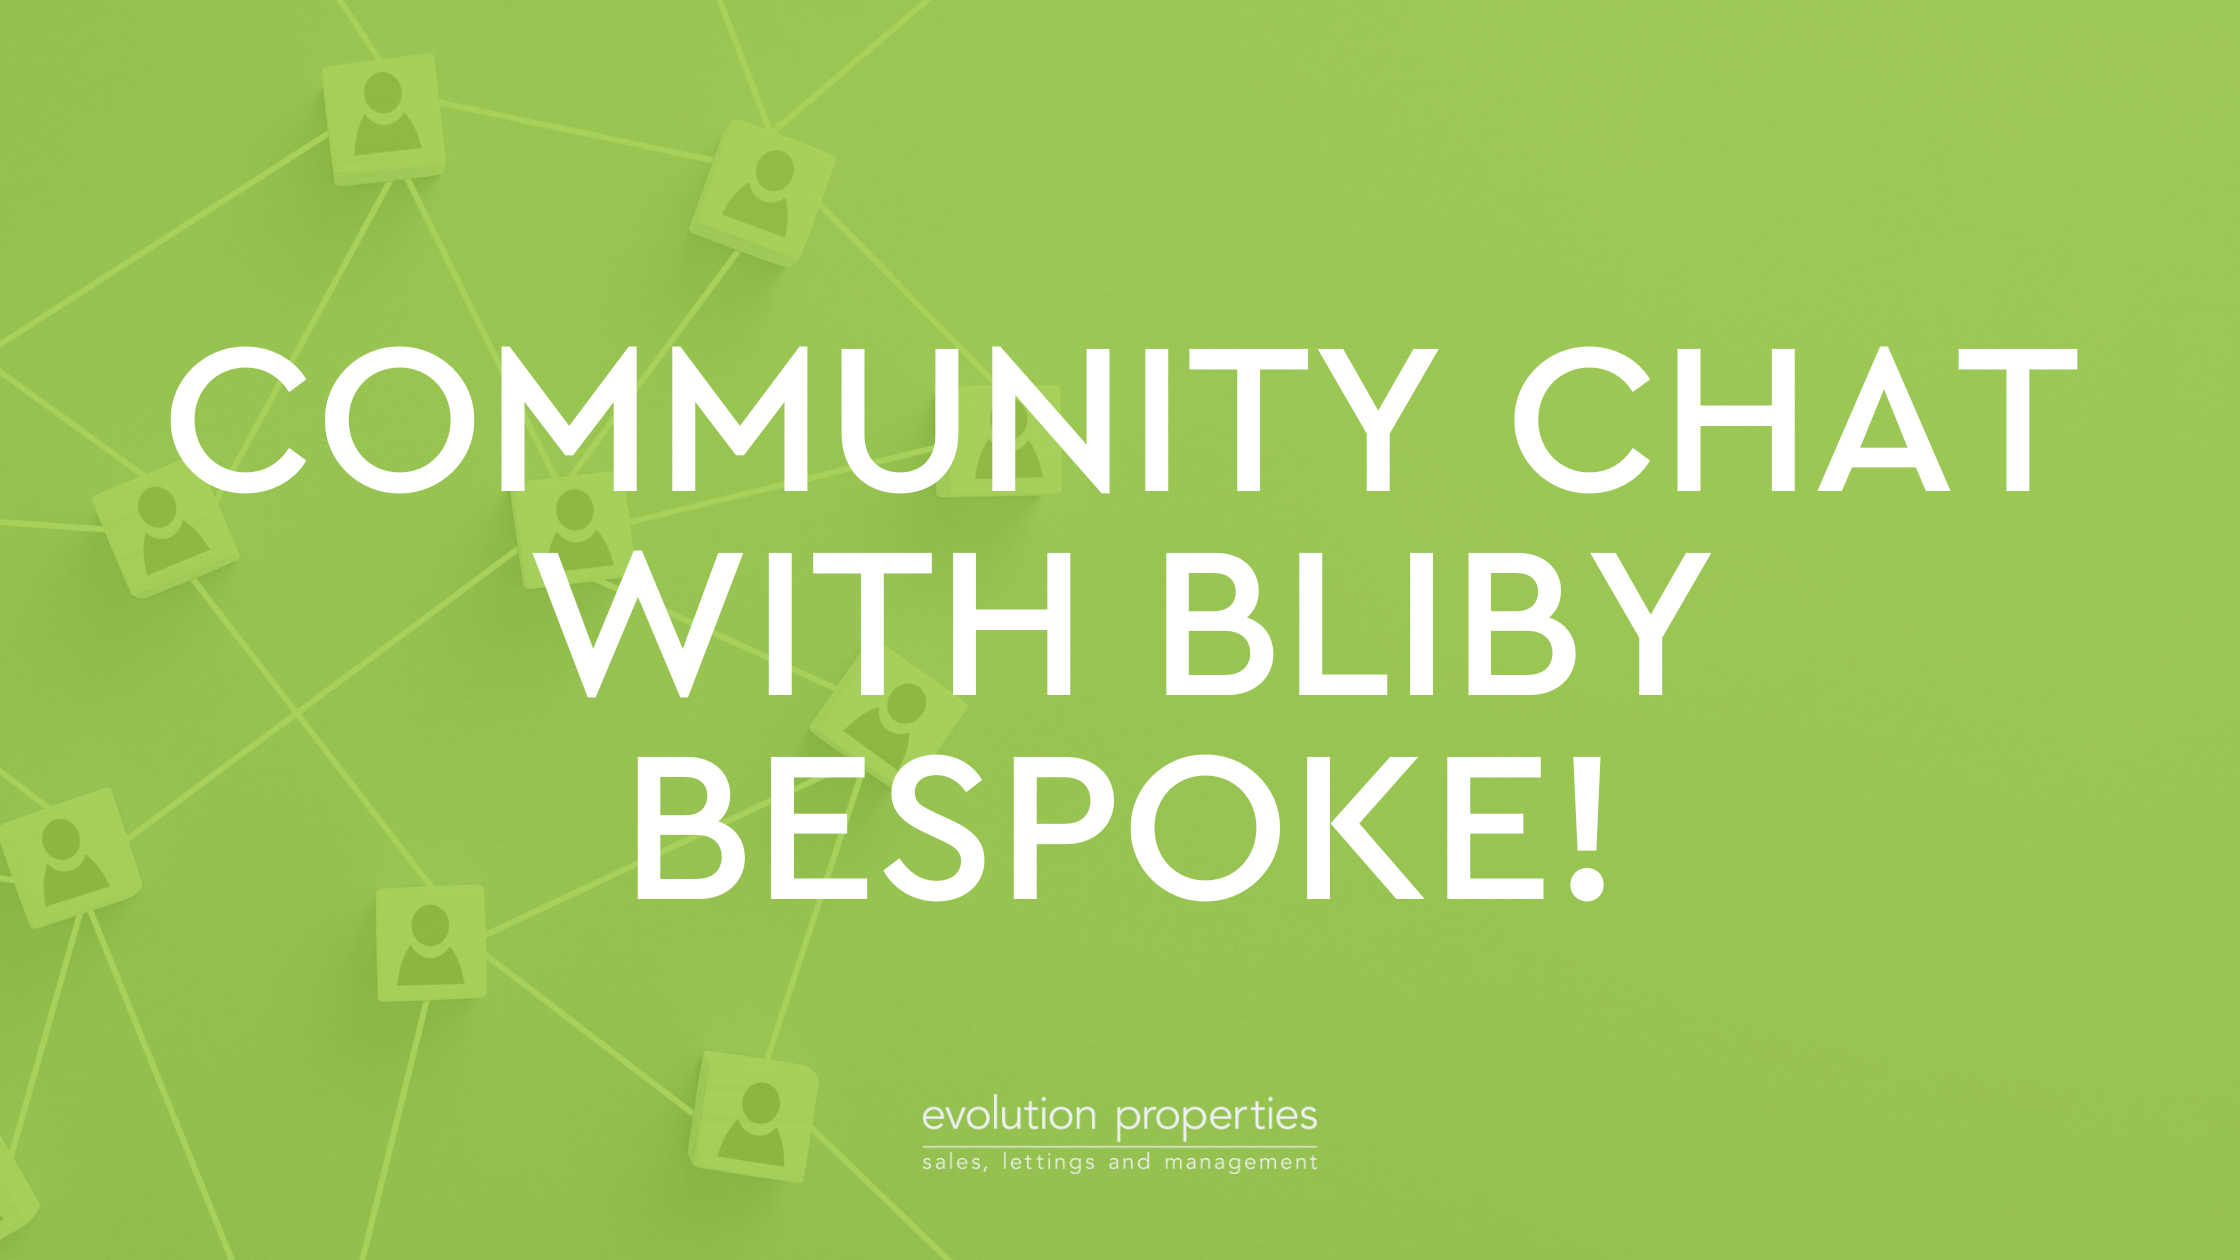 Community chat with Bliby bespoke